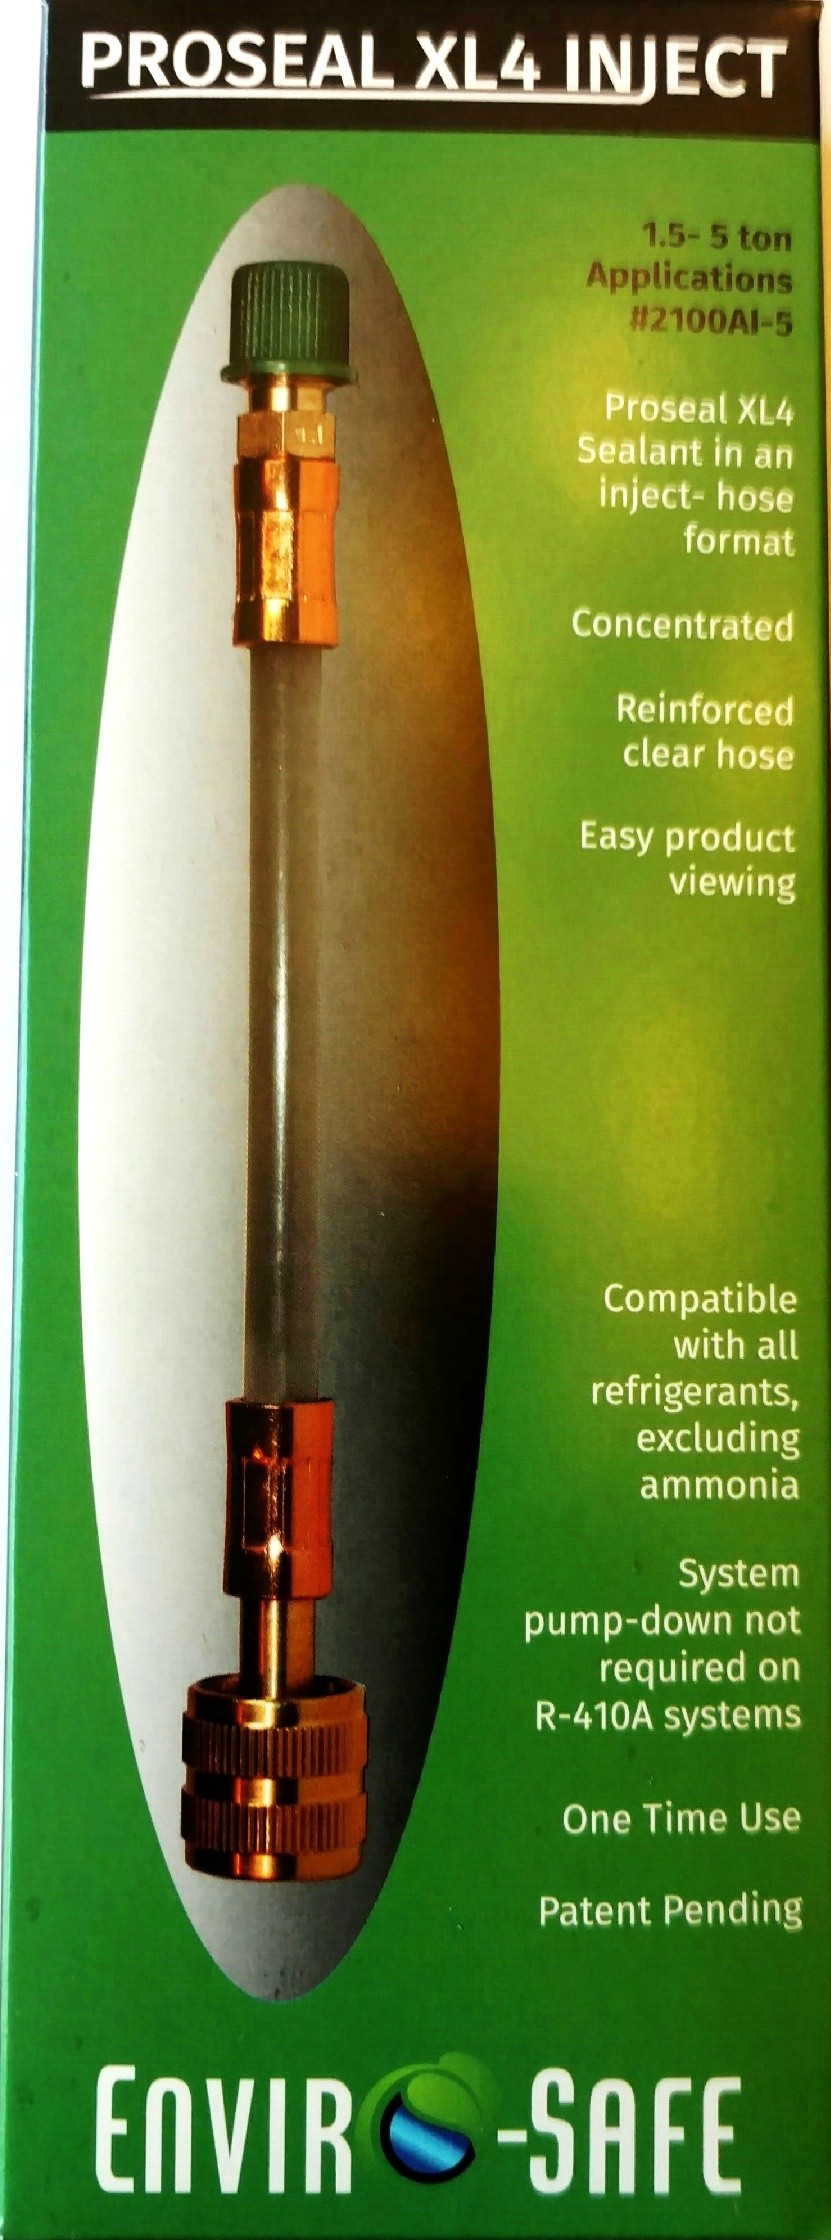 Proseal XL4 Inject